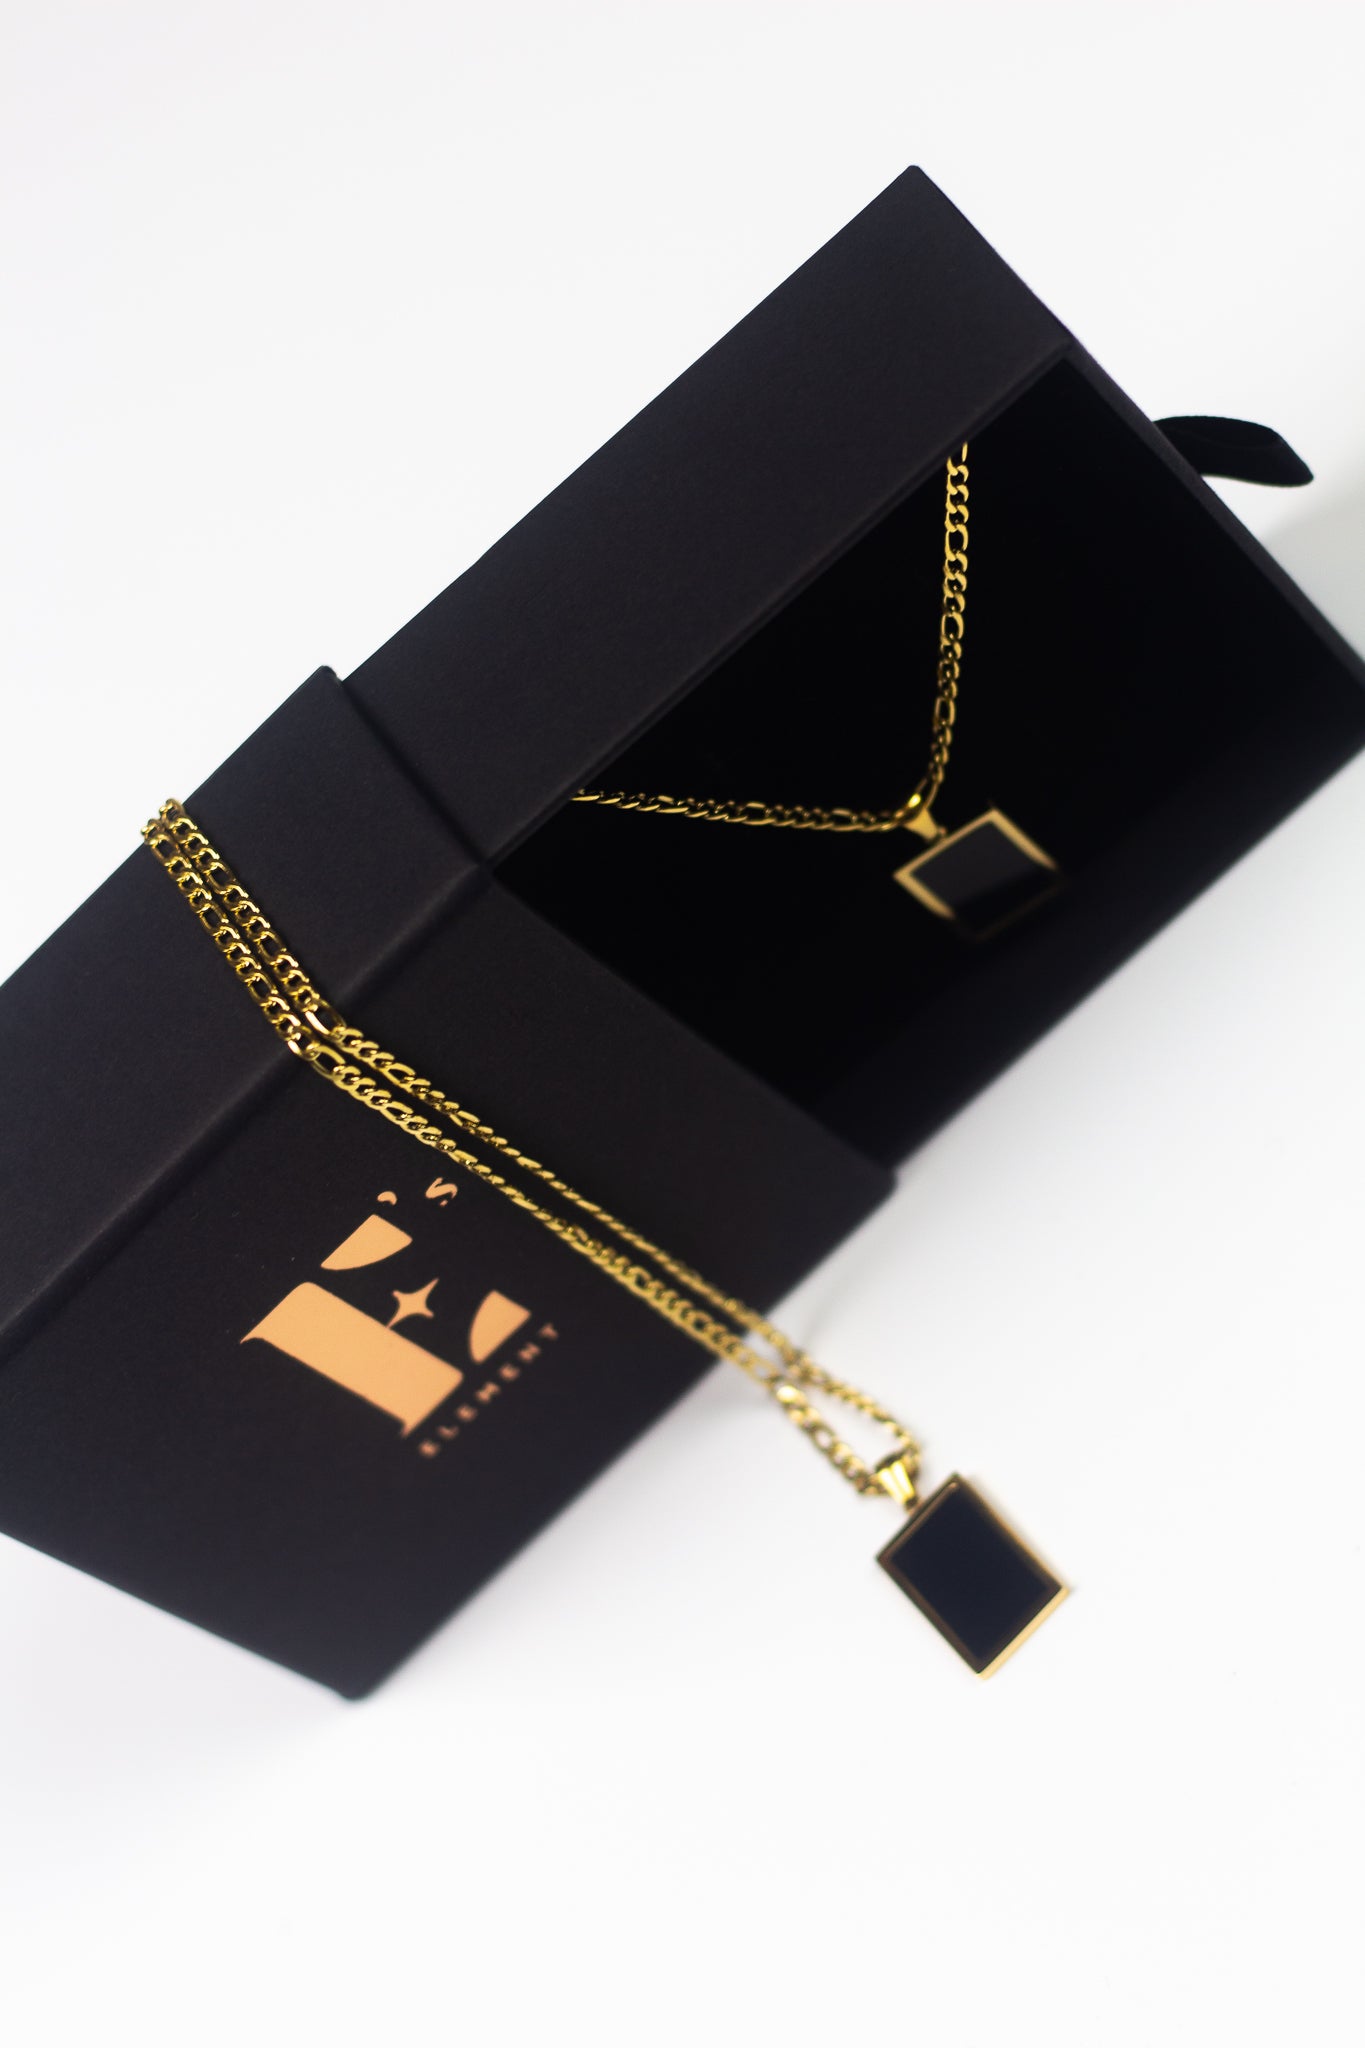 18k gold necklace with a black rectangular charm placed in its container. On the left is the cap for the container with the E's Element imprinted in gold with the necklace on placed on top. The Infinity Zircon Necklace by E's Element.